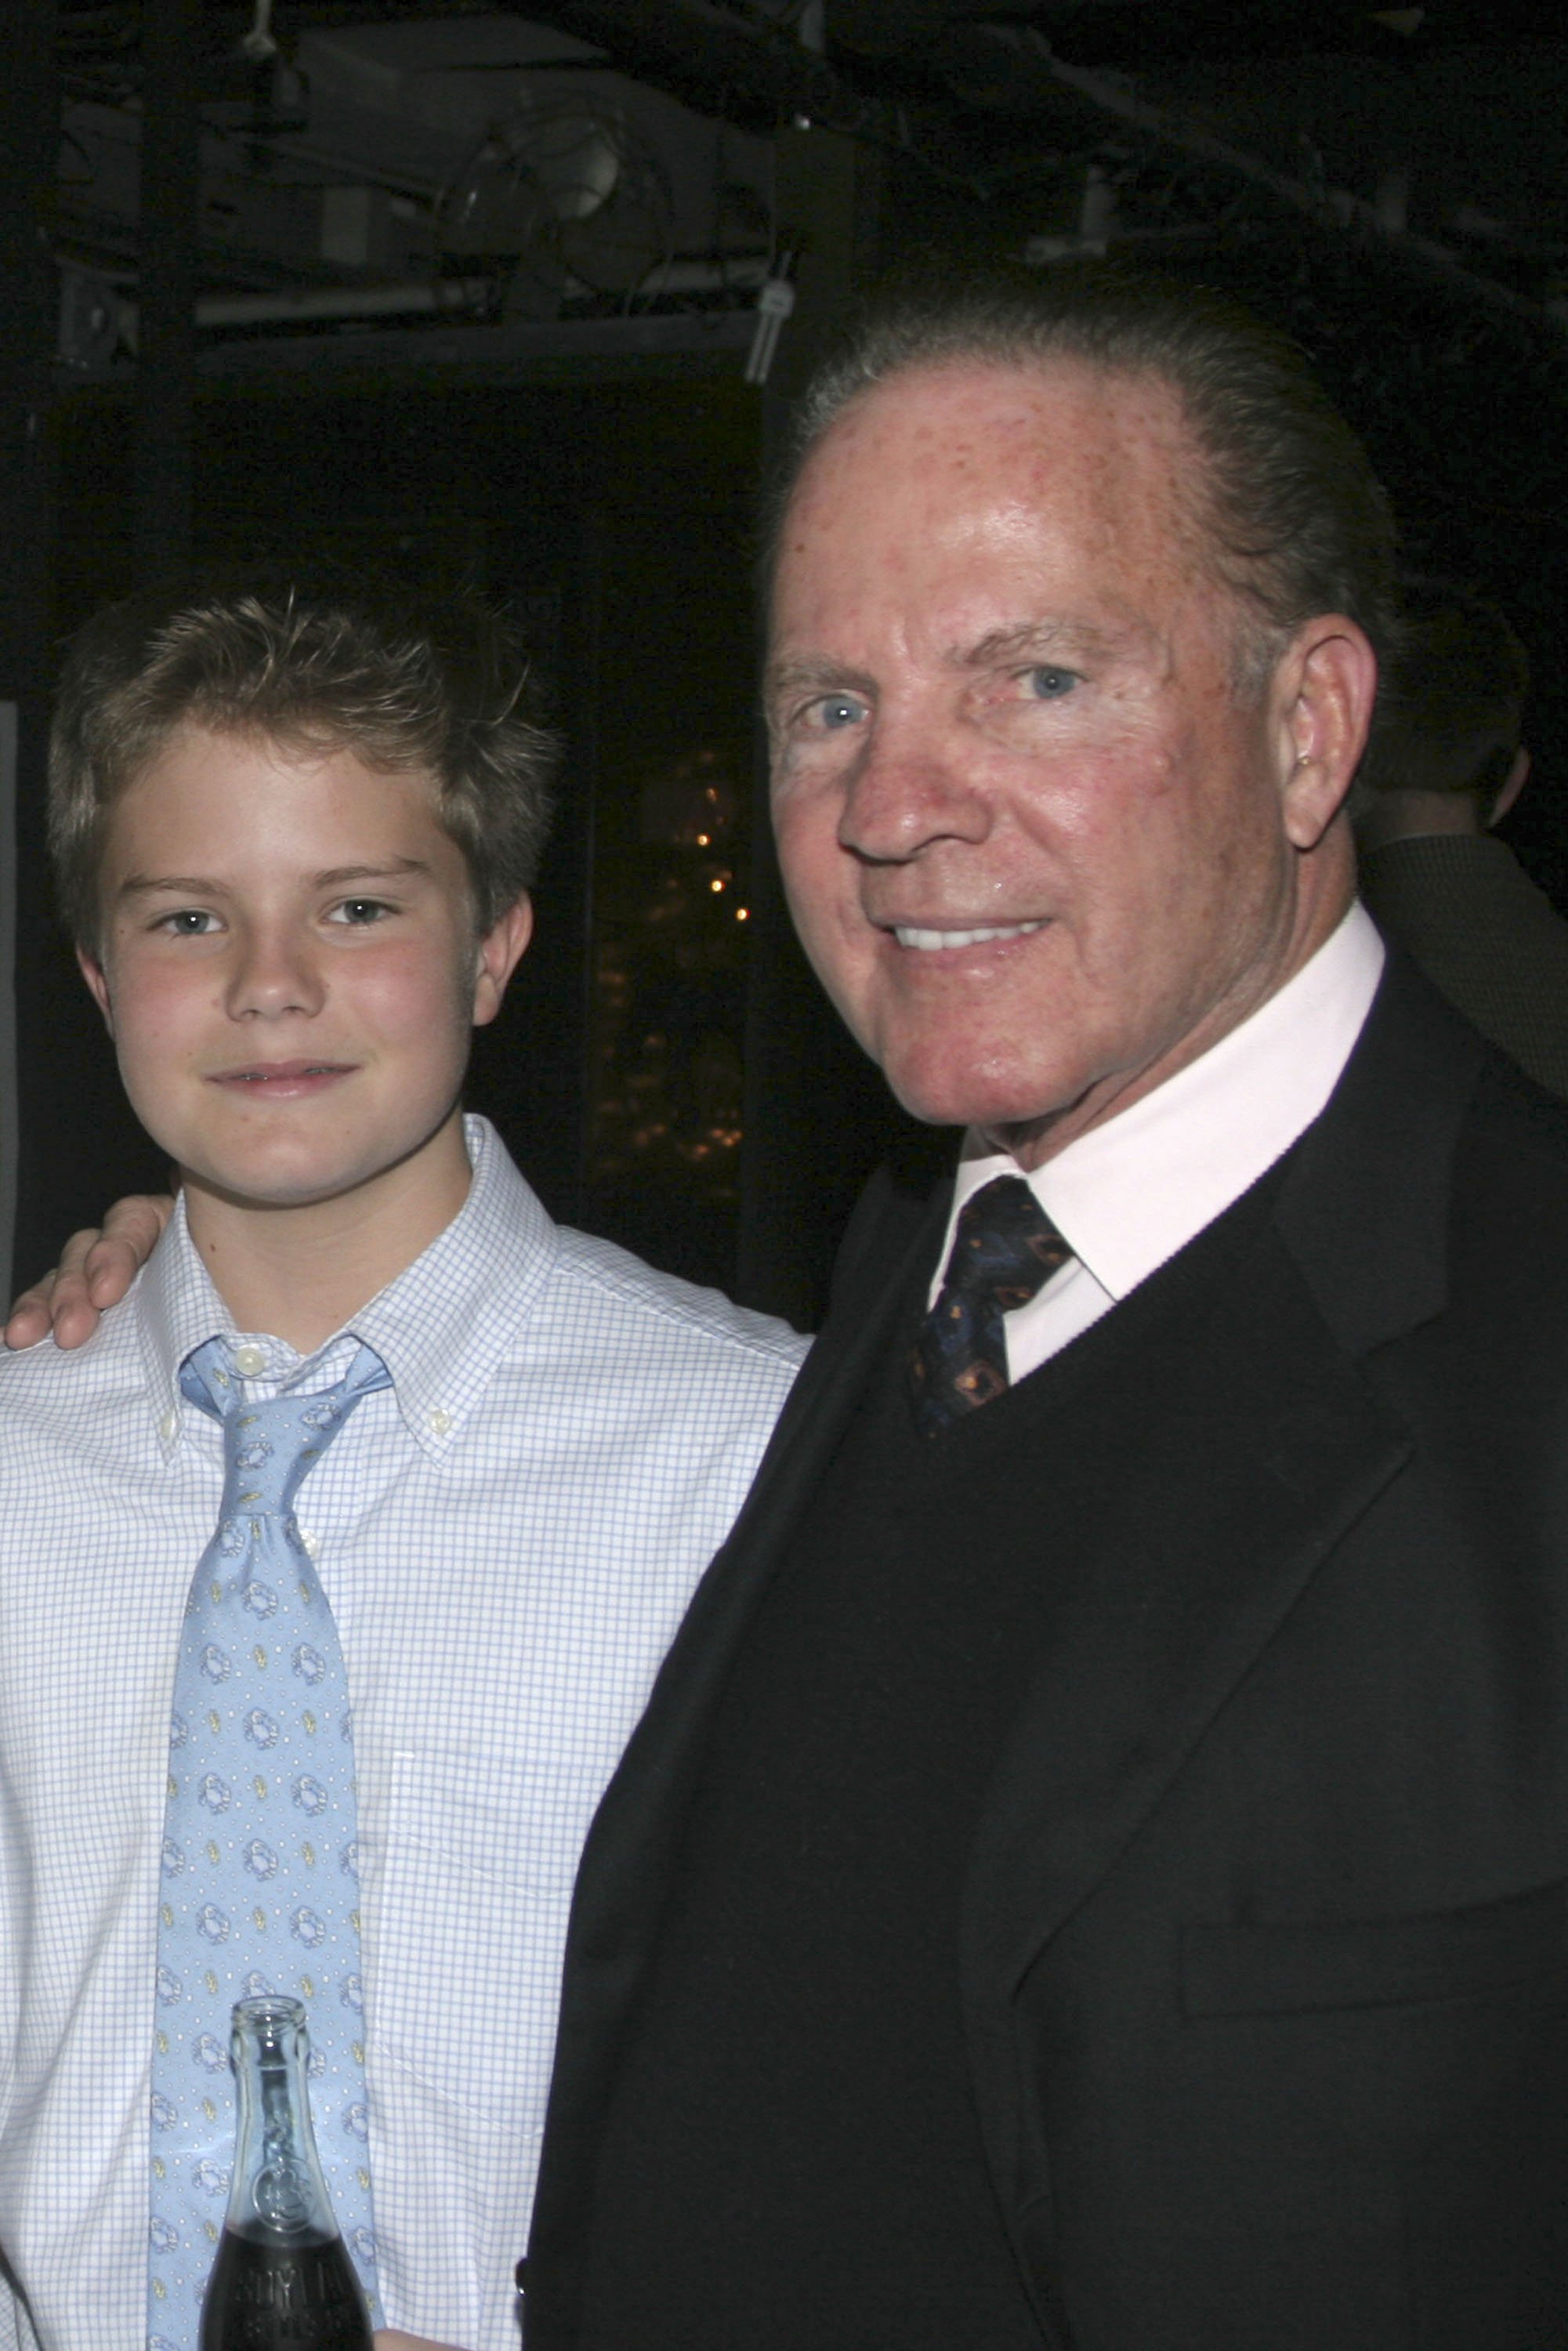 Cody and Frank Gifford during Kathie Lee Gifford's New Musical "Under The Bridge" - Opening Night Afterparty in New York, on January 7, 2005. | Source: Getty Images